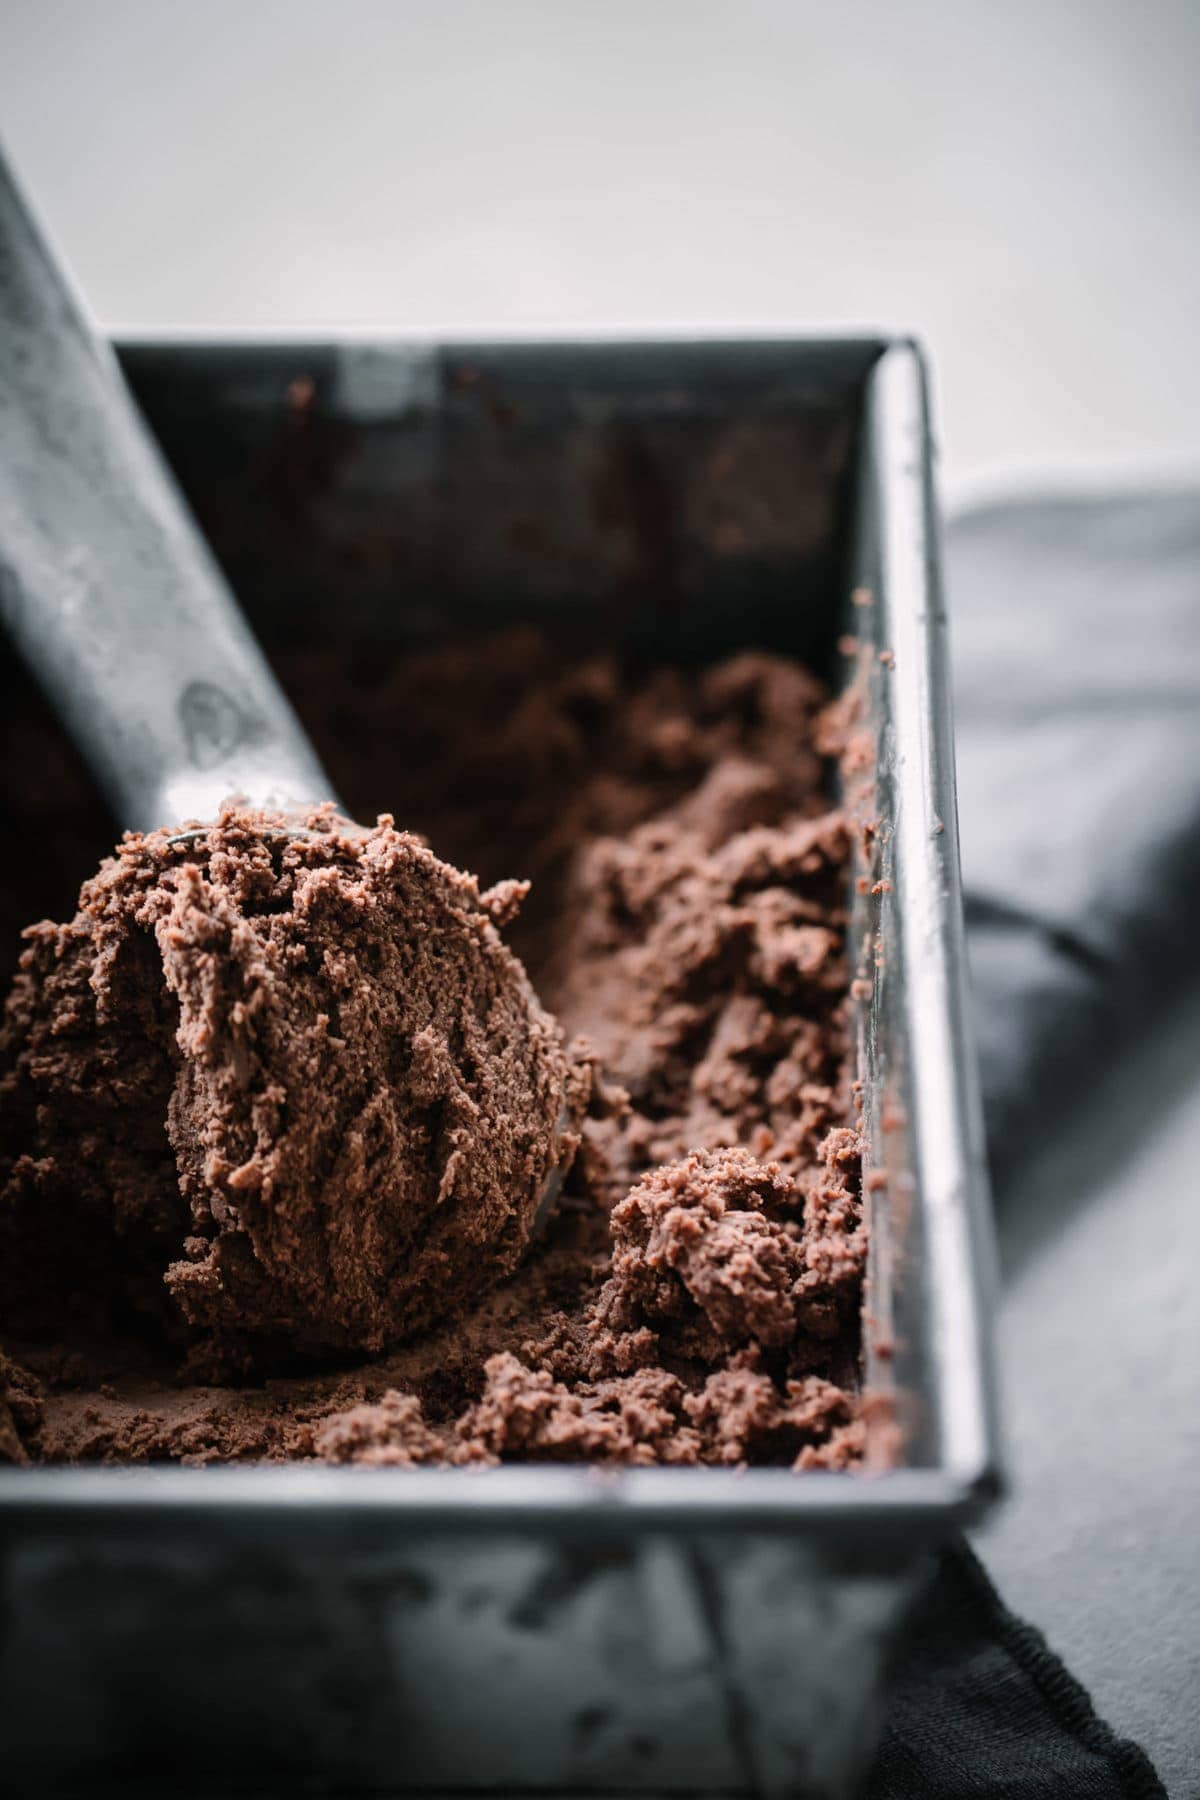 Rich and delicious, this Keto Brownie Ice Cream is the perfect summer treat. It's so good that you won't even know it is low carb and gluten free